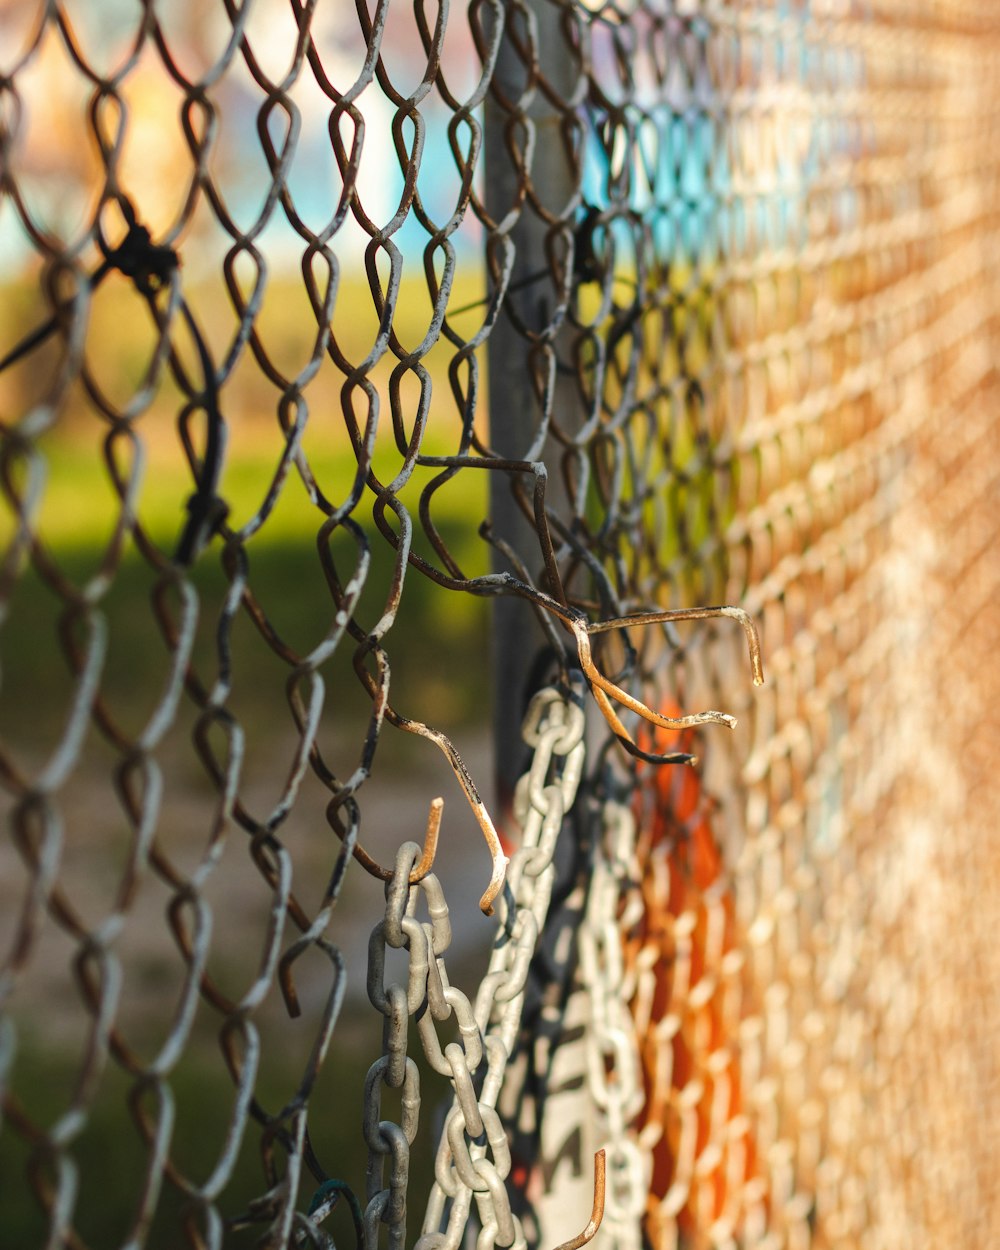 close-up photo of cyclone fence